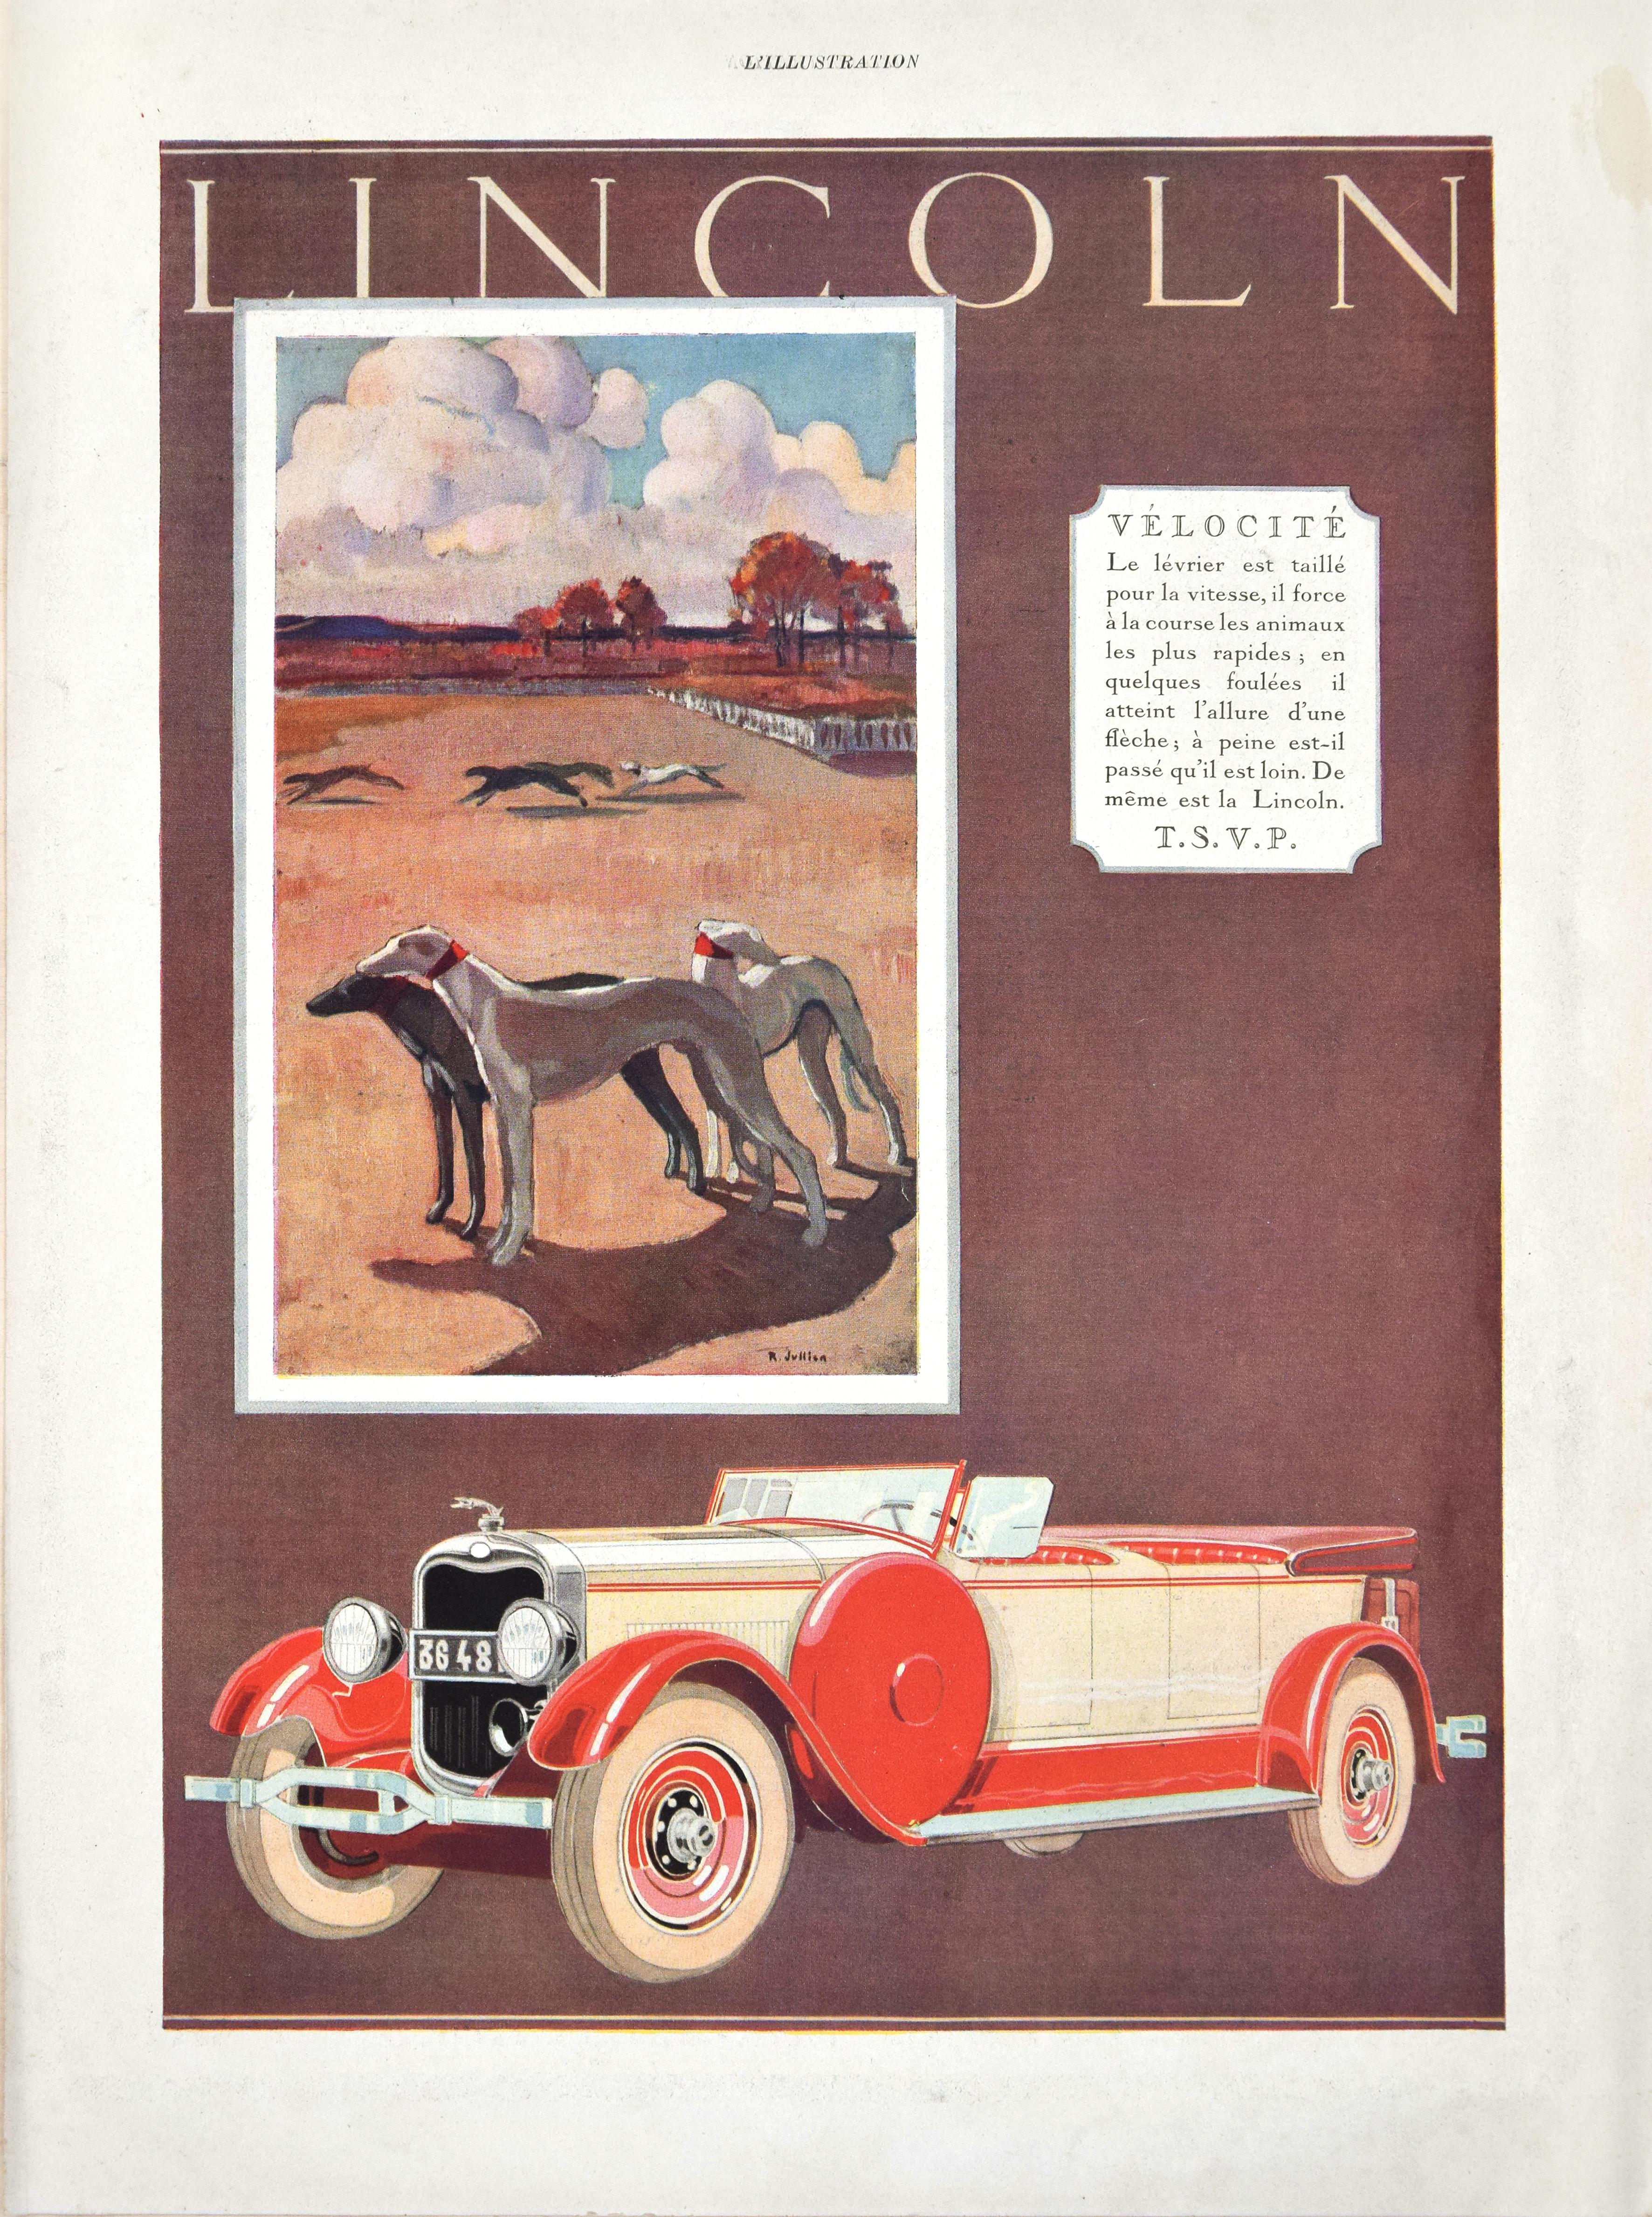 Lincoln Velocity - Original Vintage Advertising on Paper - 1927